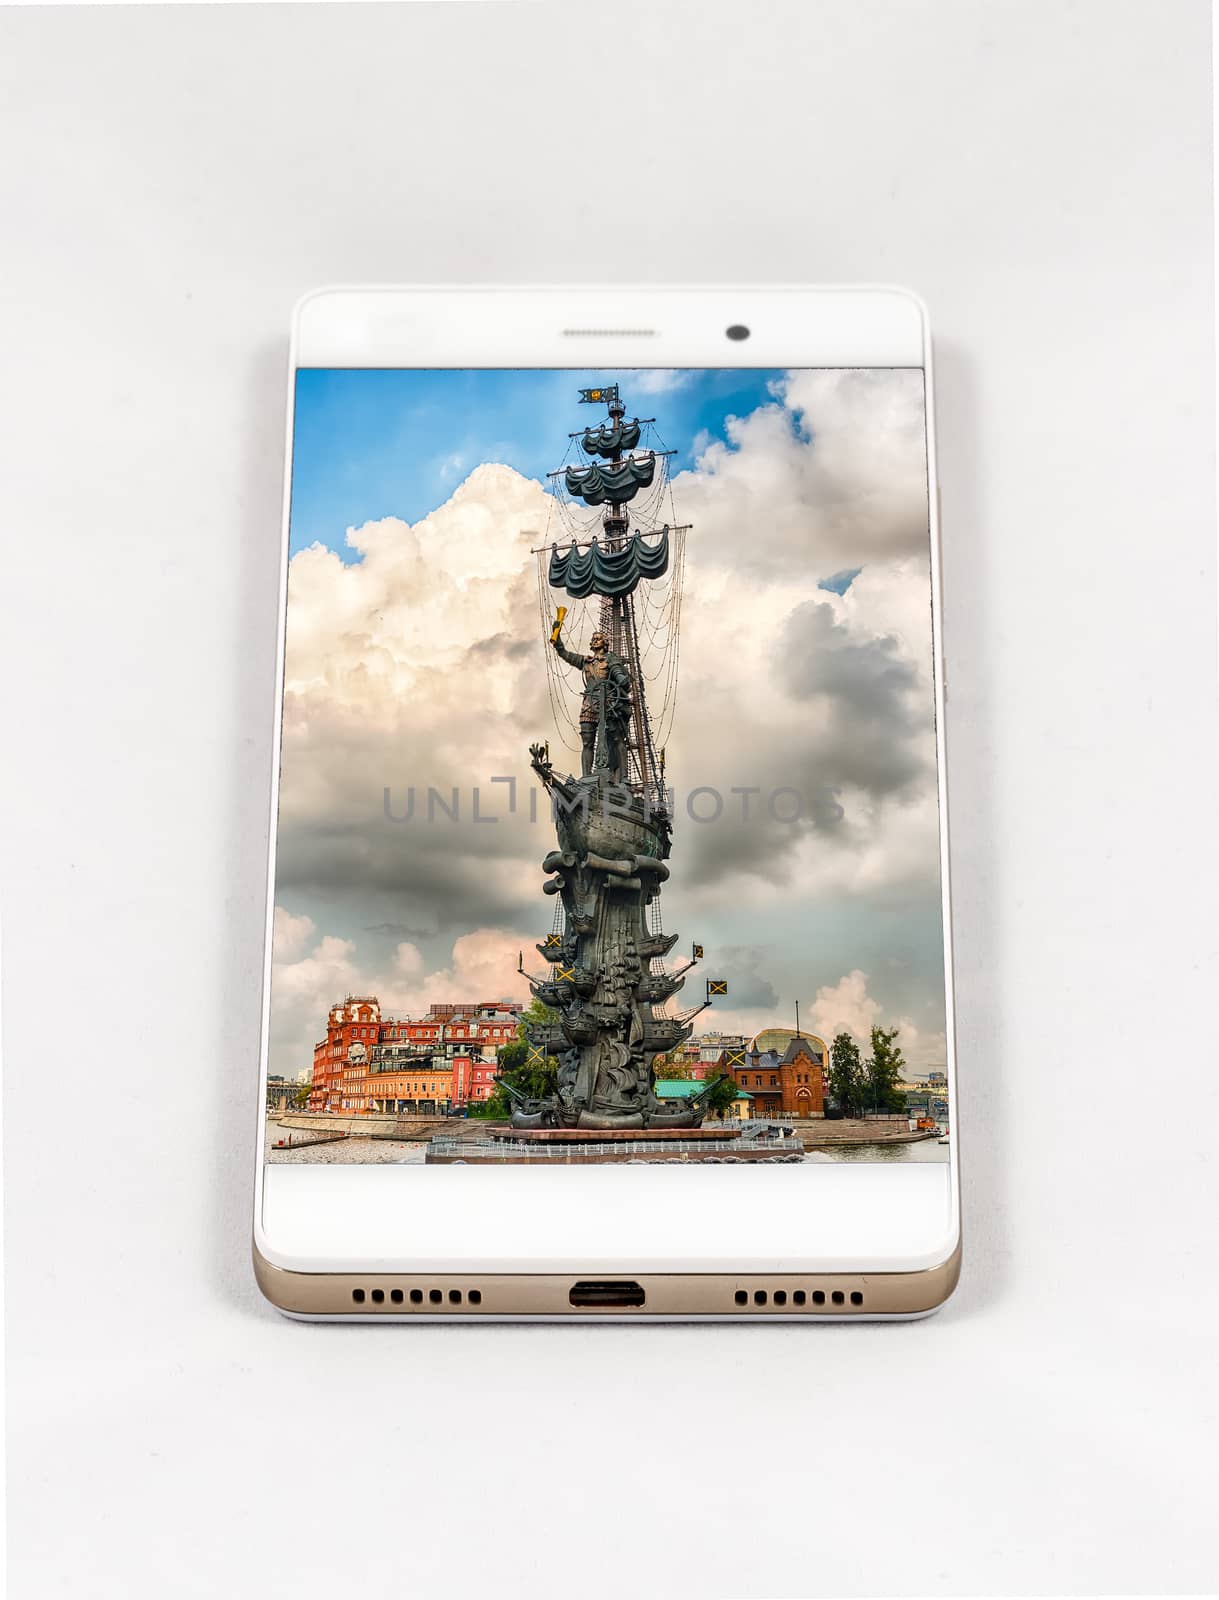 Modern smartphone with full screen picture of Moscow, Russia. Concept for travel smartphone photography. All images in this composition are made by me and separately available on my portfolio